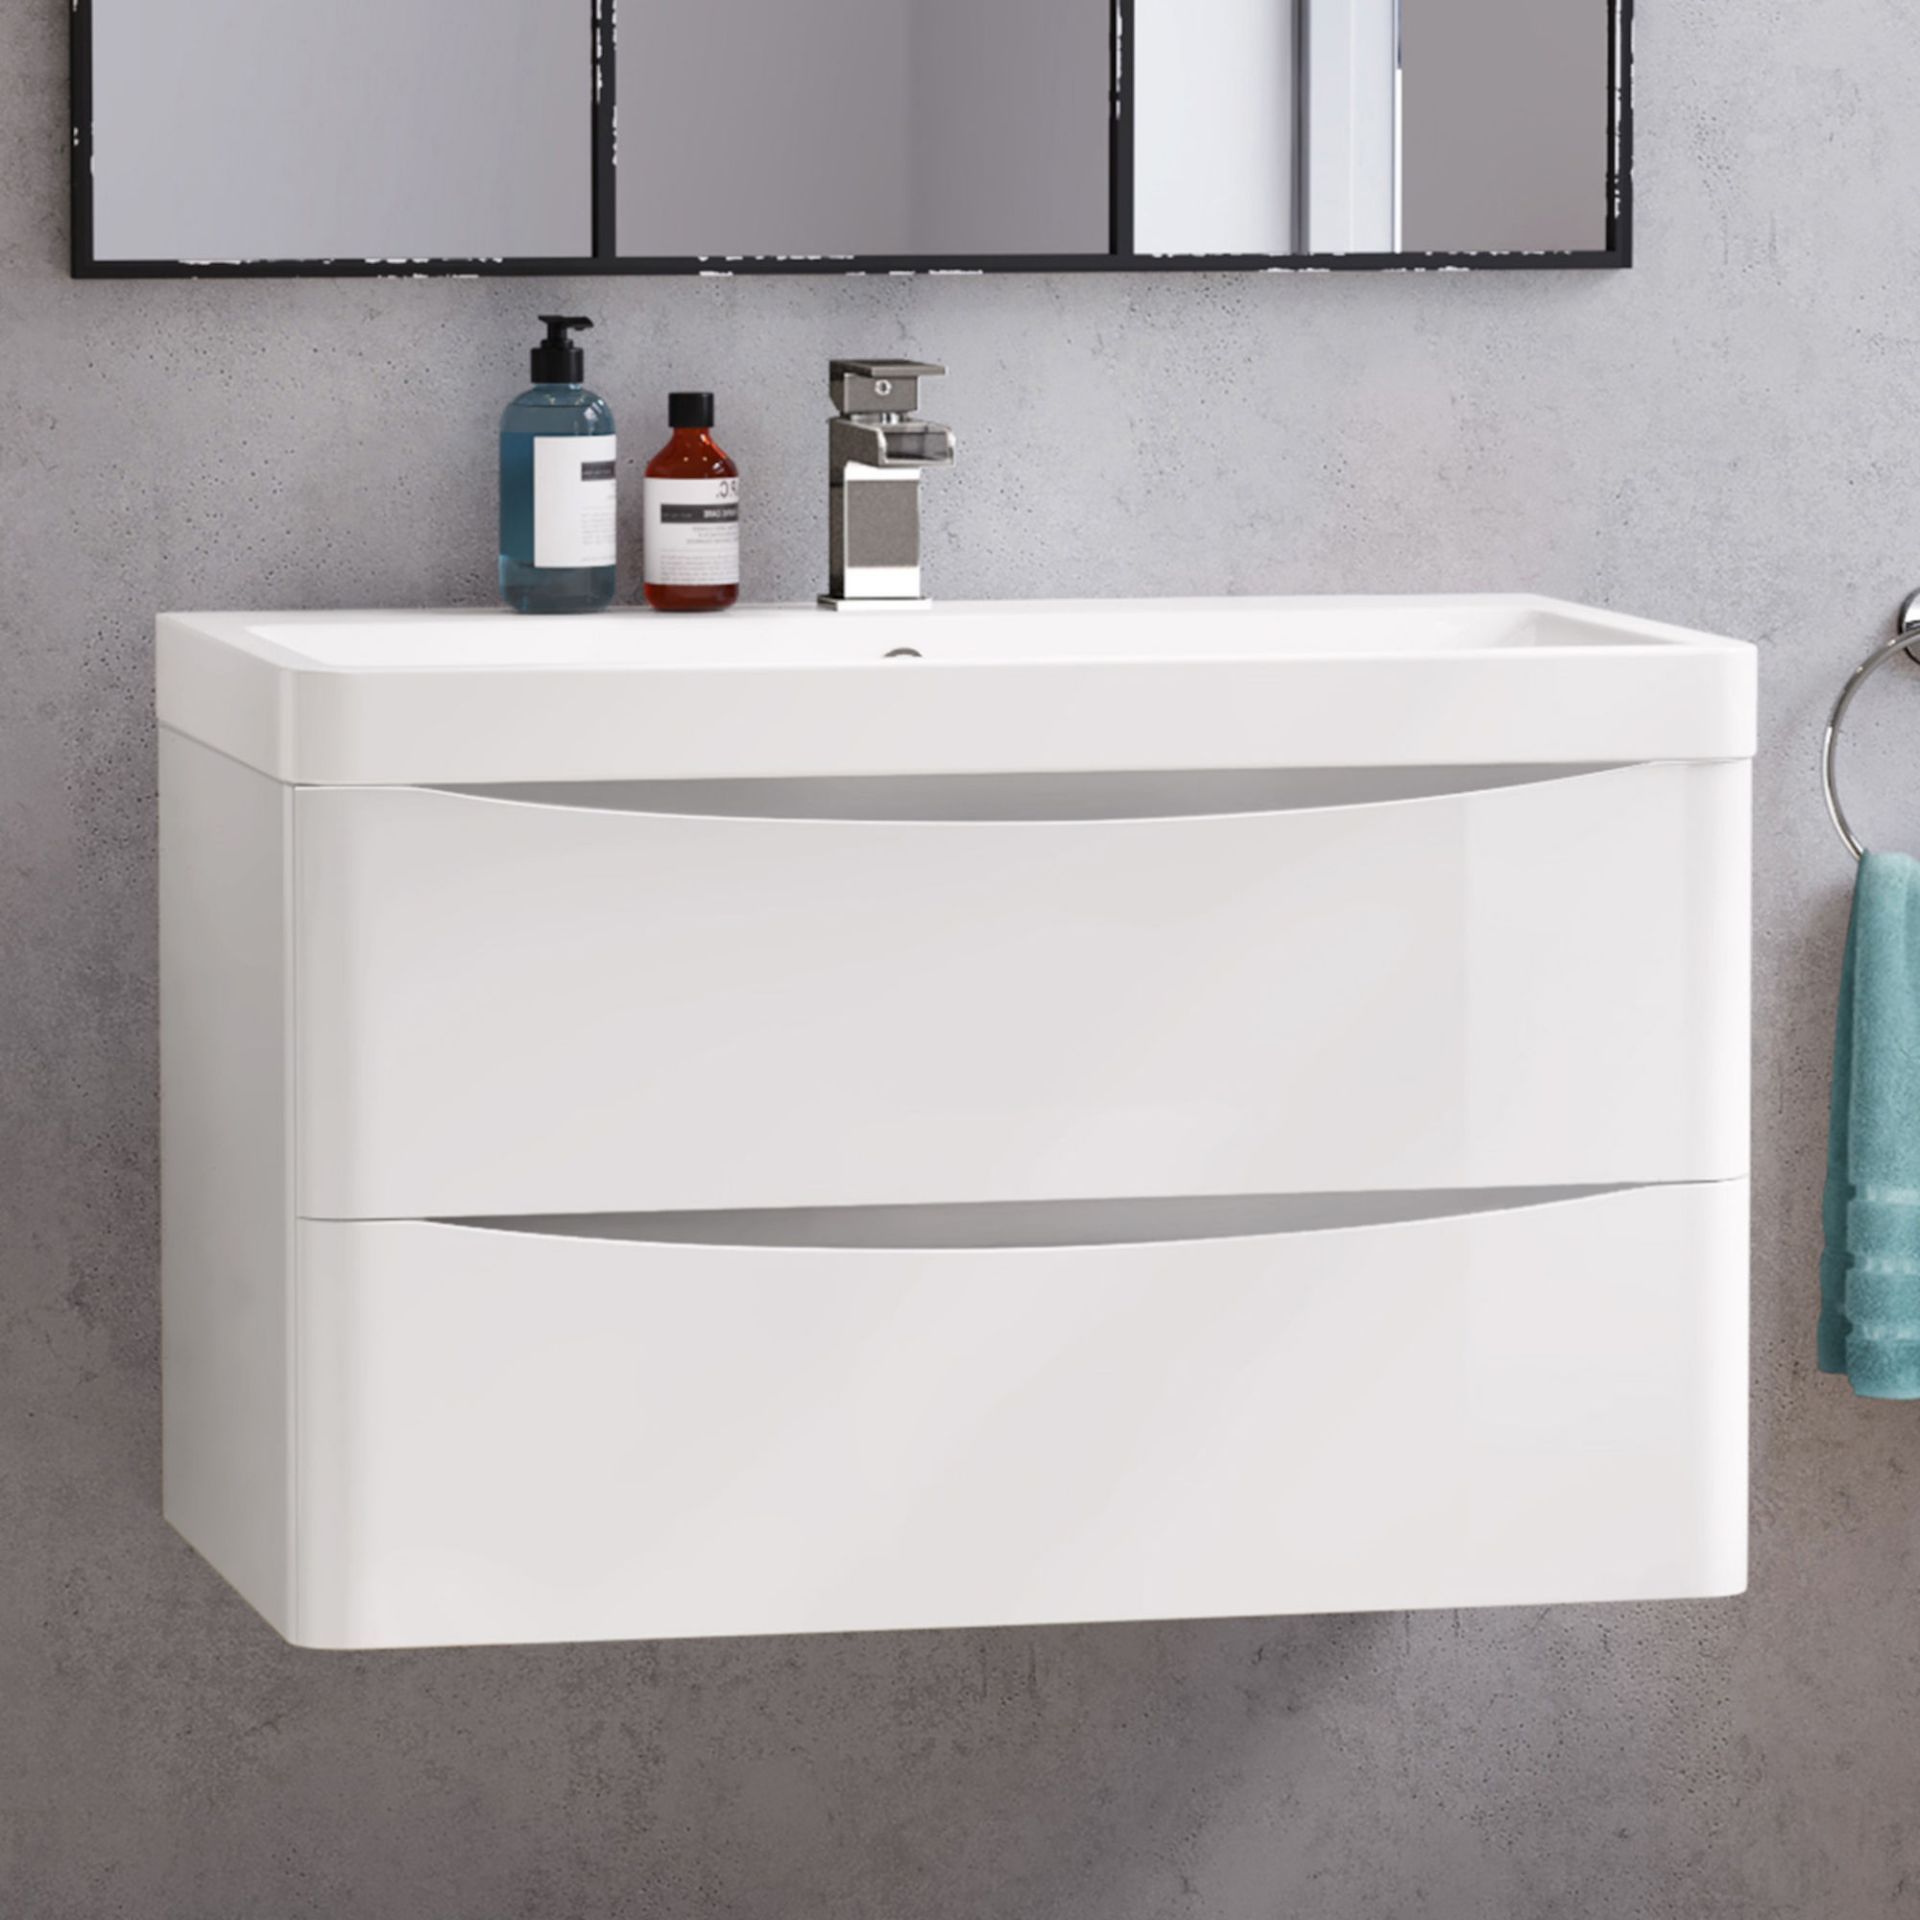 BRAND NEW BOXED  800mm Austin II Gloss White Built In Basin Drawer Unit - Wall Hung. RRP £499.99.